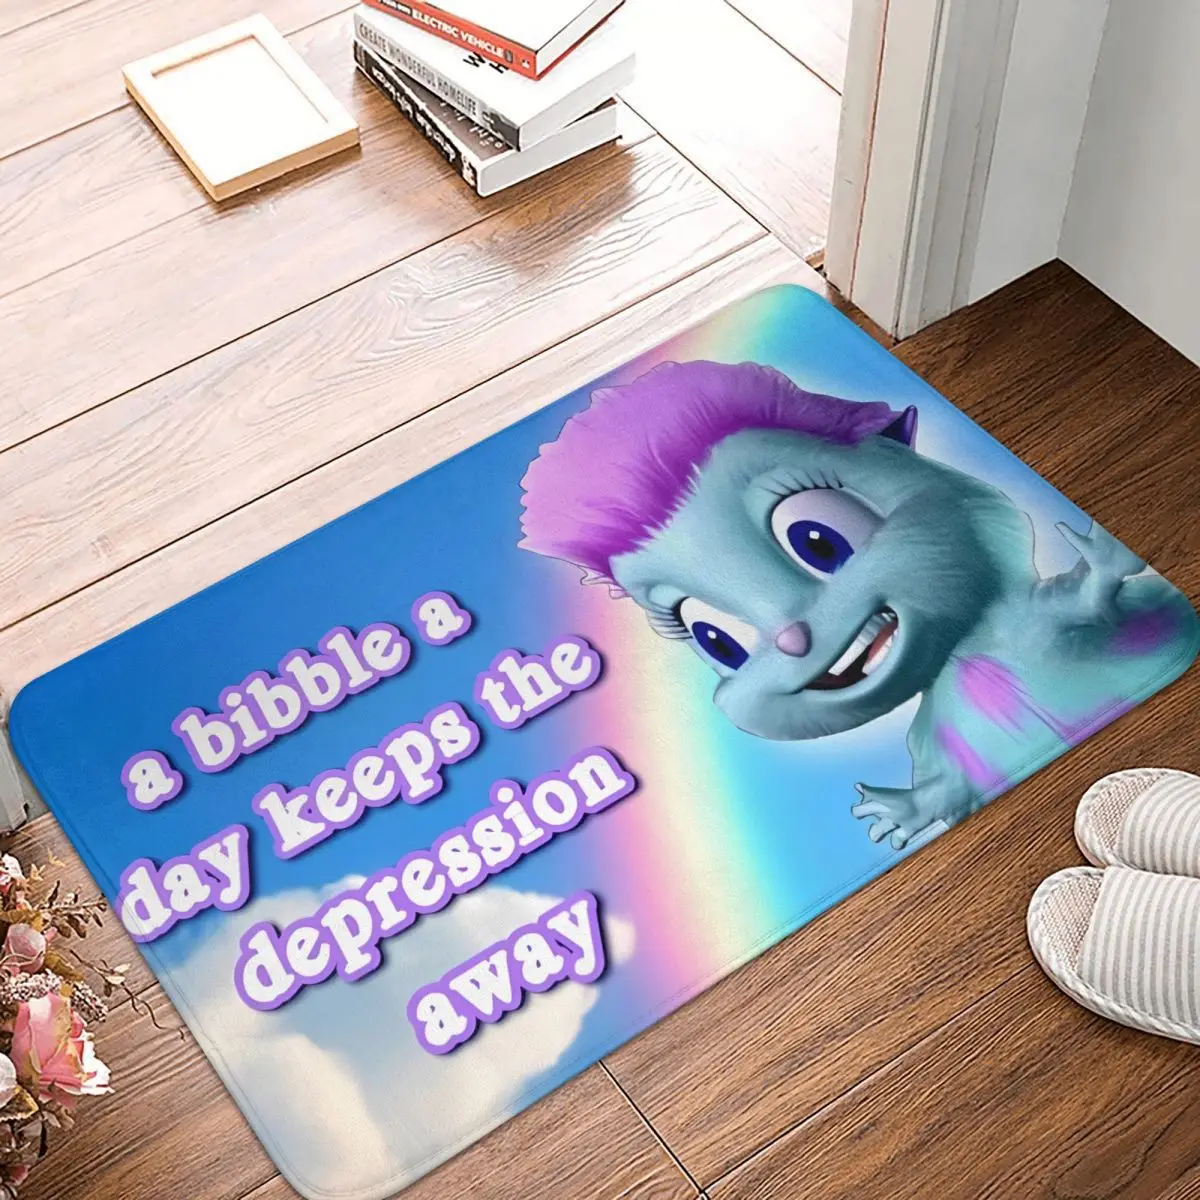 

Icarly Gibby Non-slip Doormat Bibble A Cays Keeps The Depression Away Bath Kitchen Mat Welcome Carpet Flannel Modern Decor